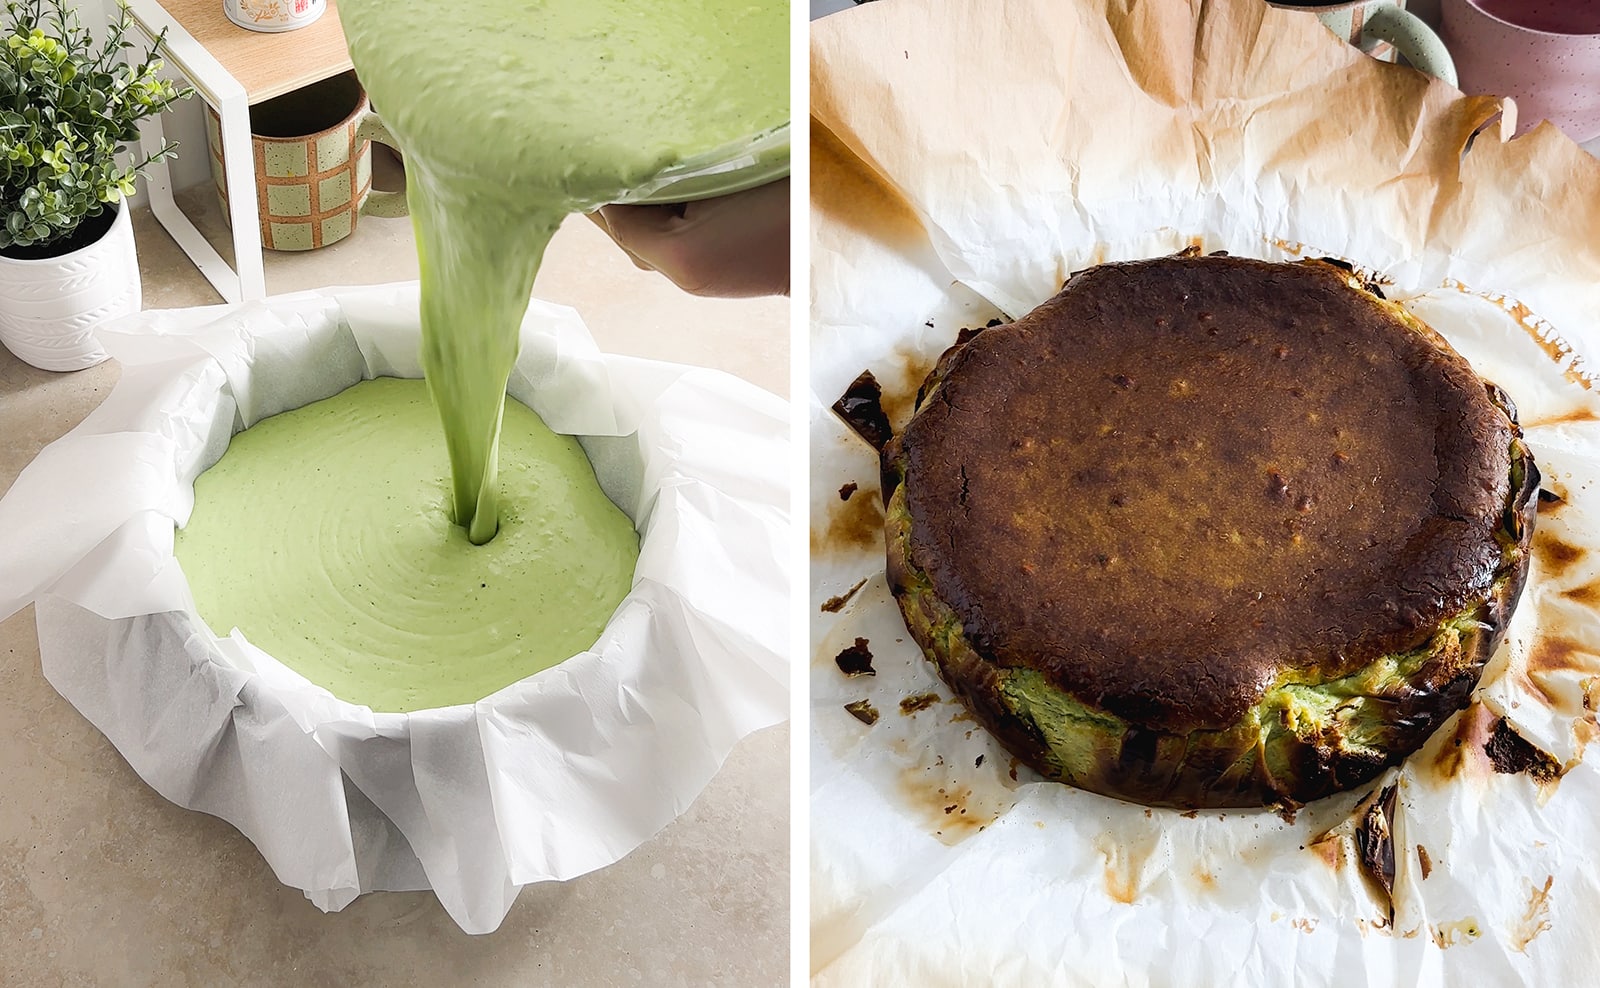 Left to right: pouring matcha cheesecake batter into lined pan, burnt cheesecake after baking in a pan.